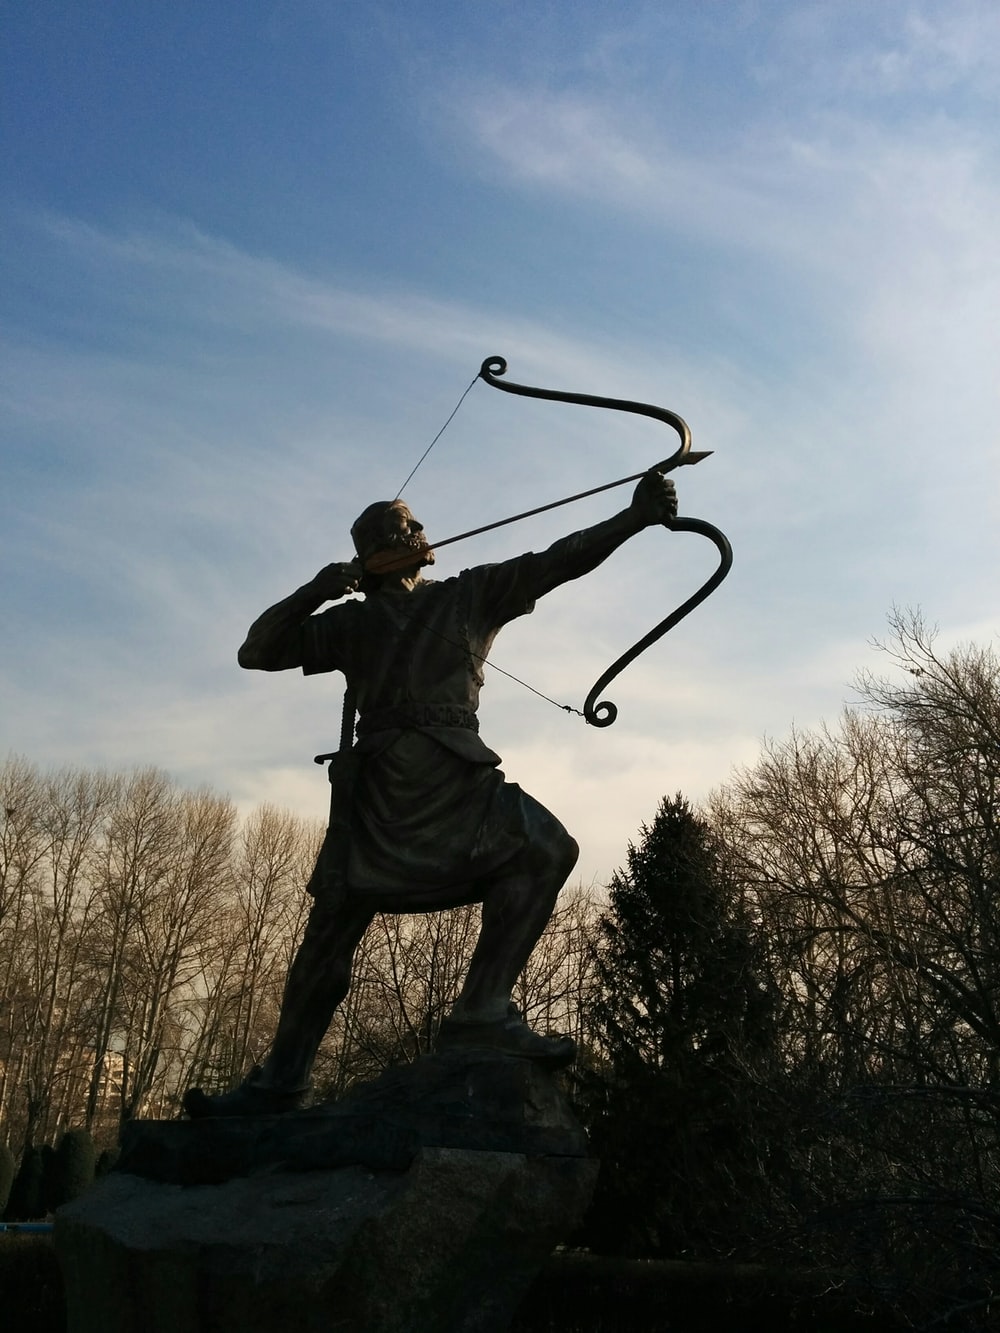 Best Bow And Arrow Picture [HD]. Download Free Image